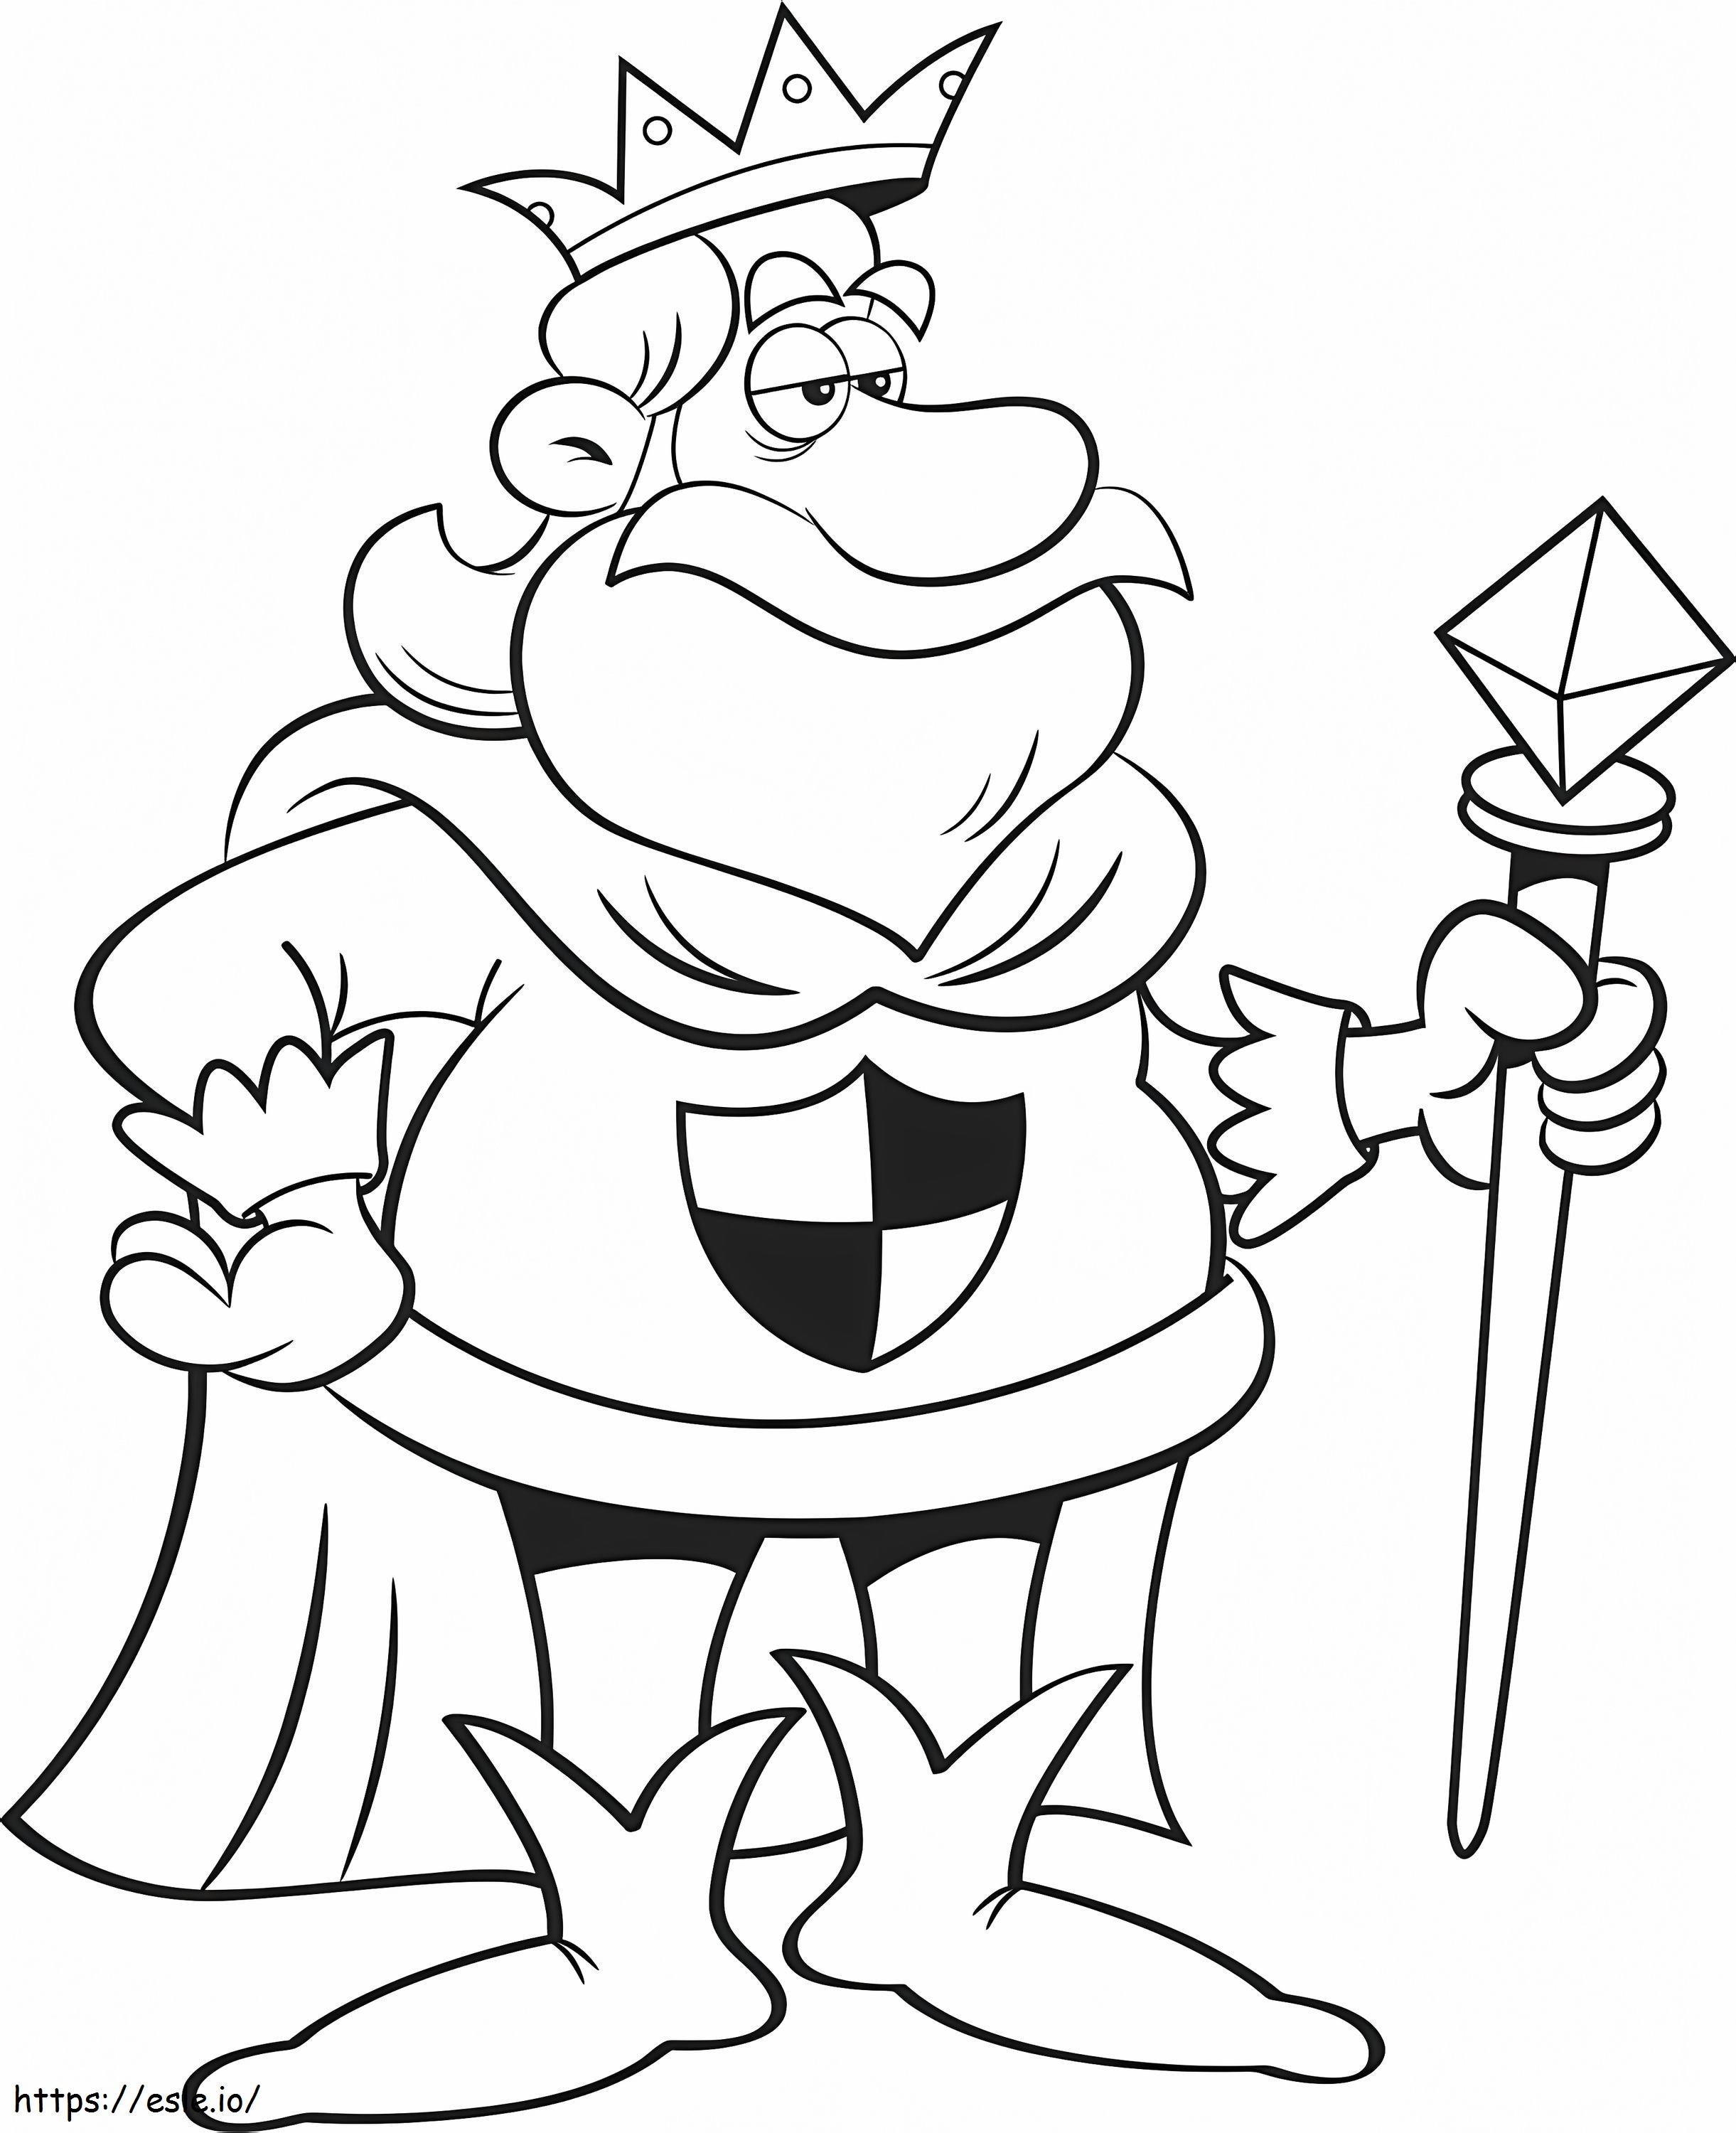 Animated King coloring page